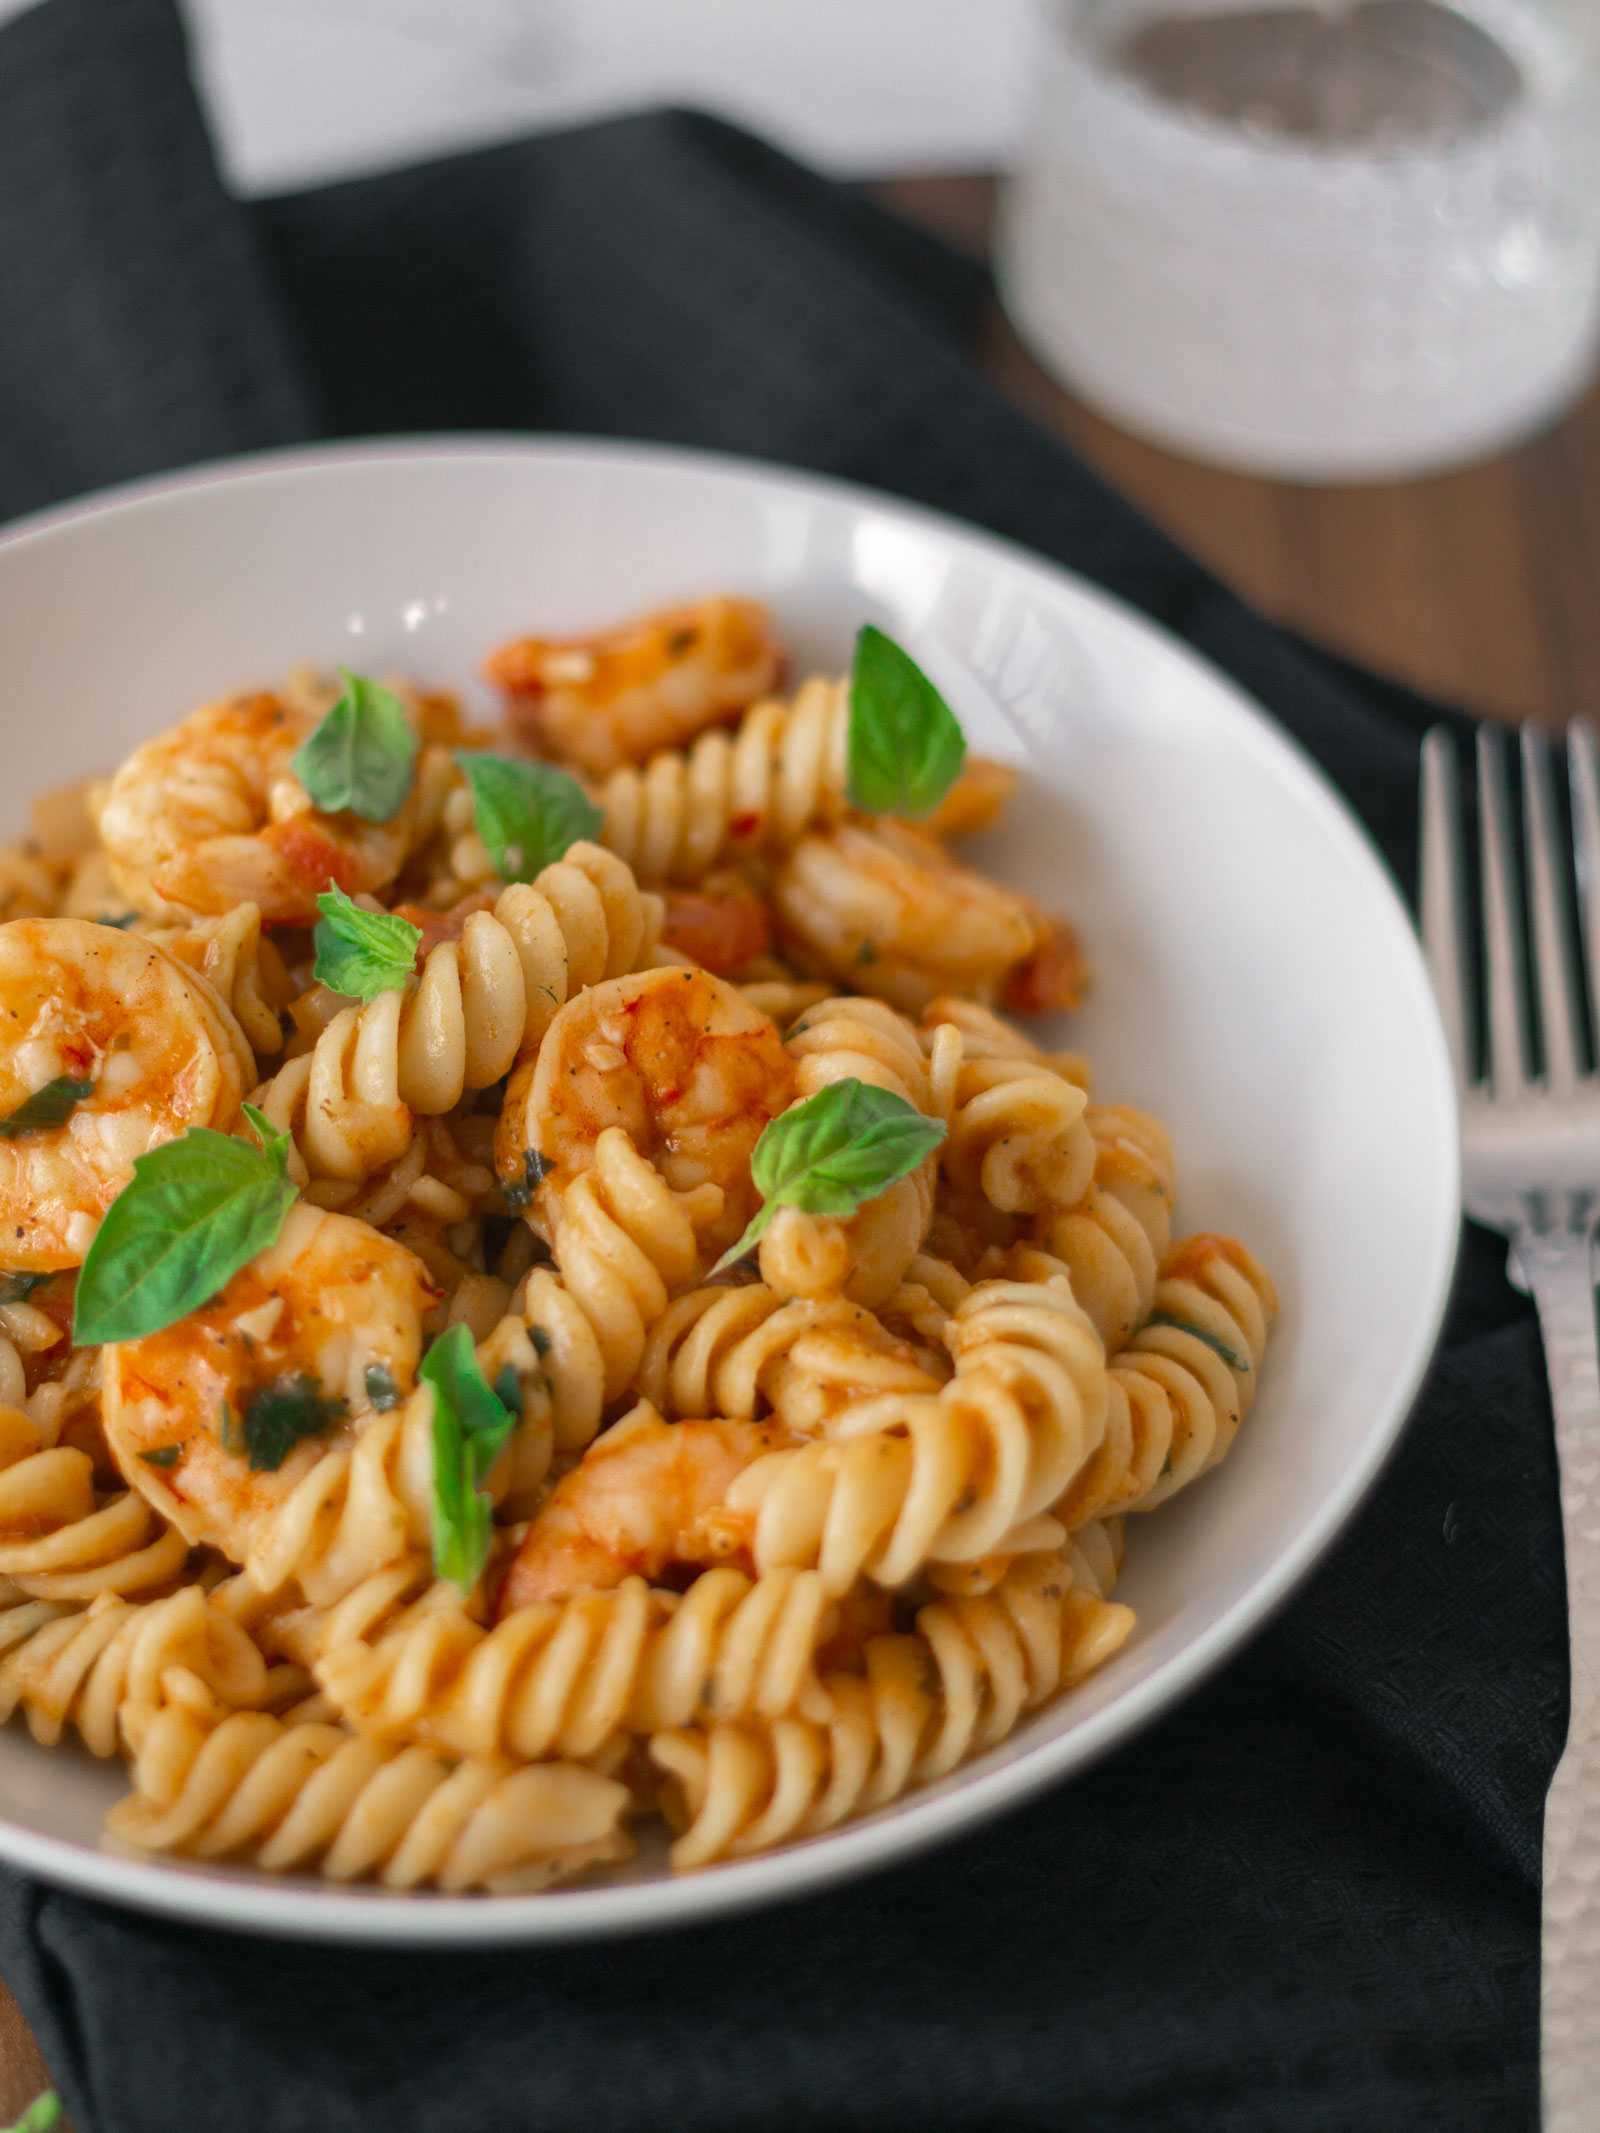 This is an image of Oliver's Tomato Shrimp Pasta. This delicious dish is sitting in a white bowl with fresh oregano sprinkled on top. The al dente pasta, fresh tomatoes, and perfectly cooked shrimp complimented with freshly minced garlic. This may become your summer go-to, as it is light yet filling! 